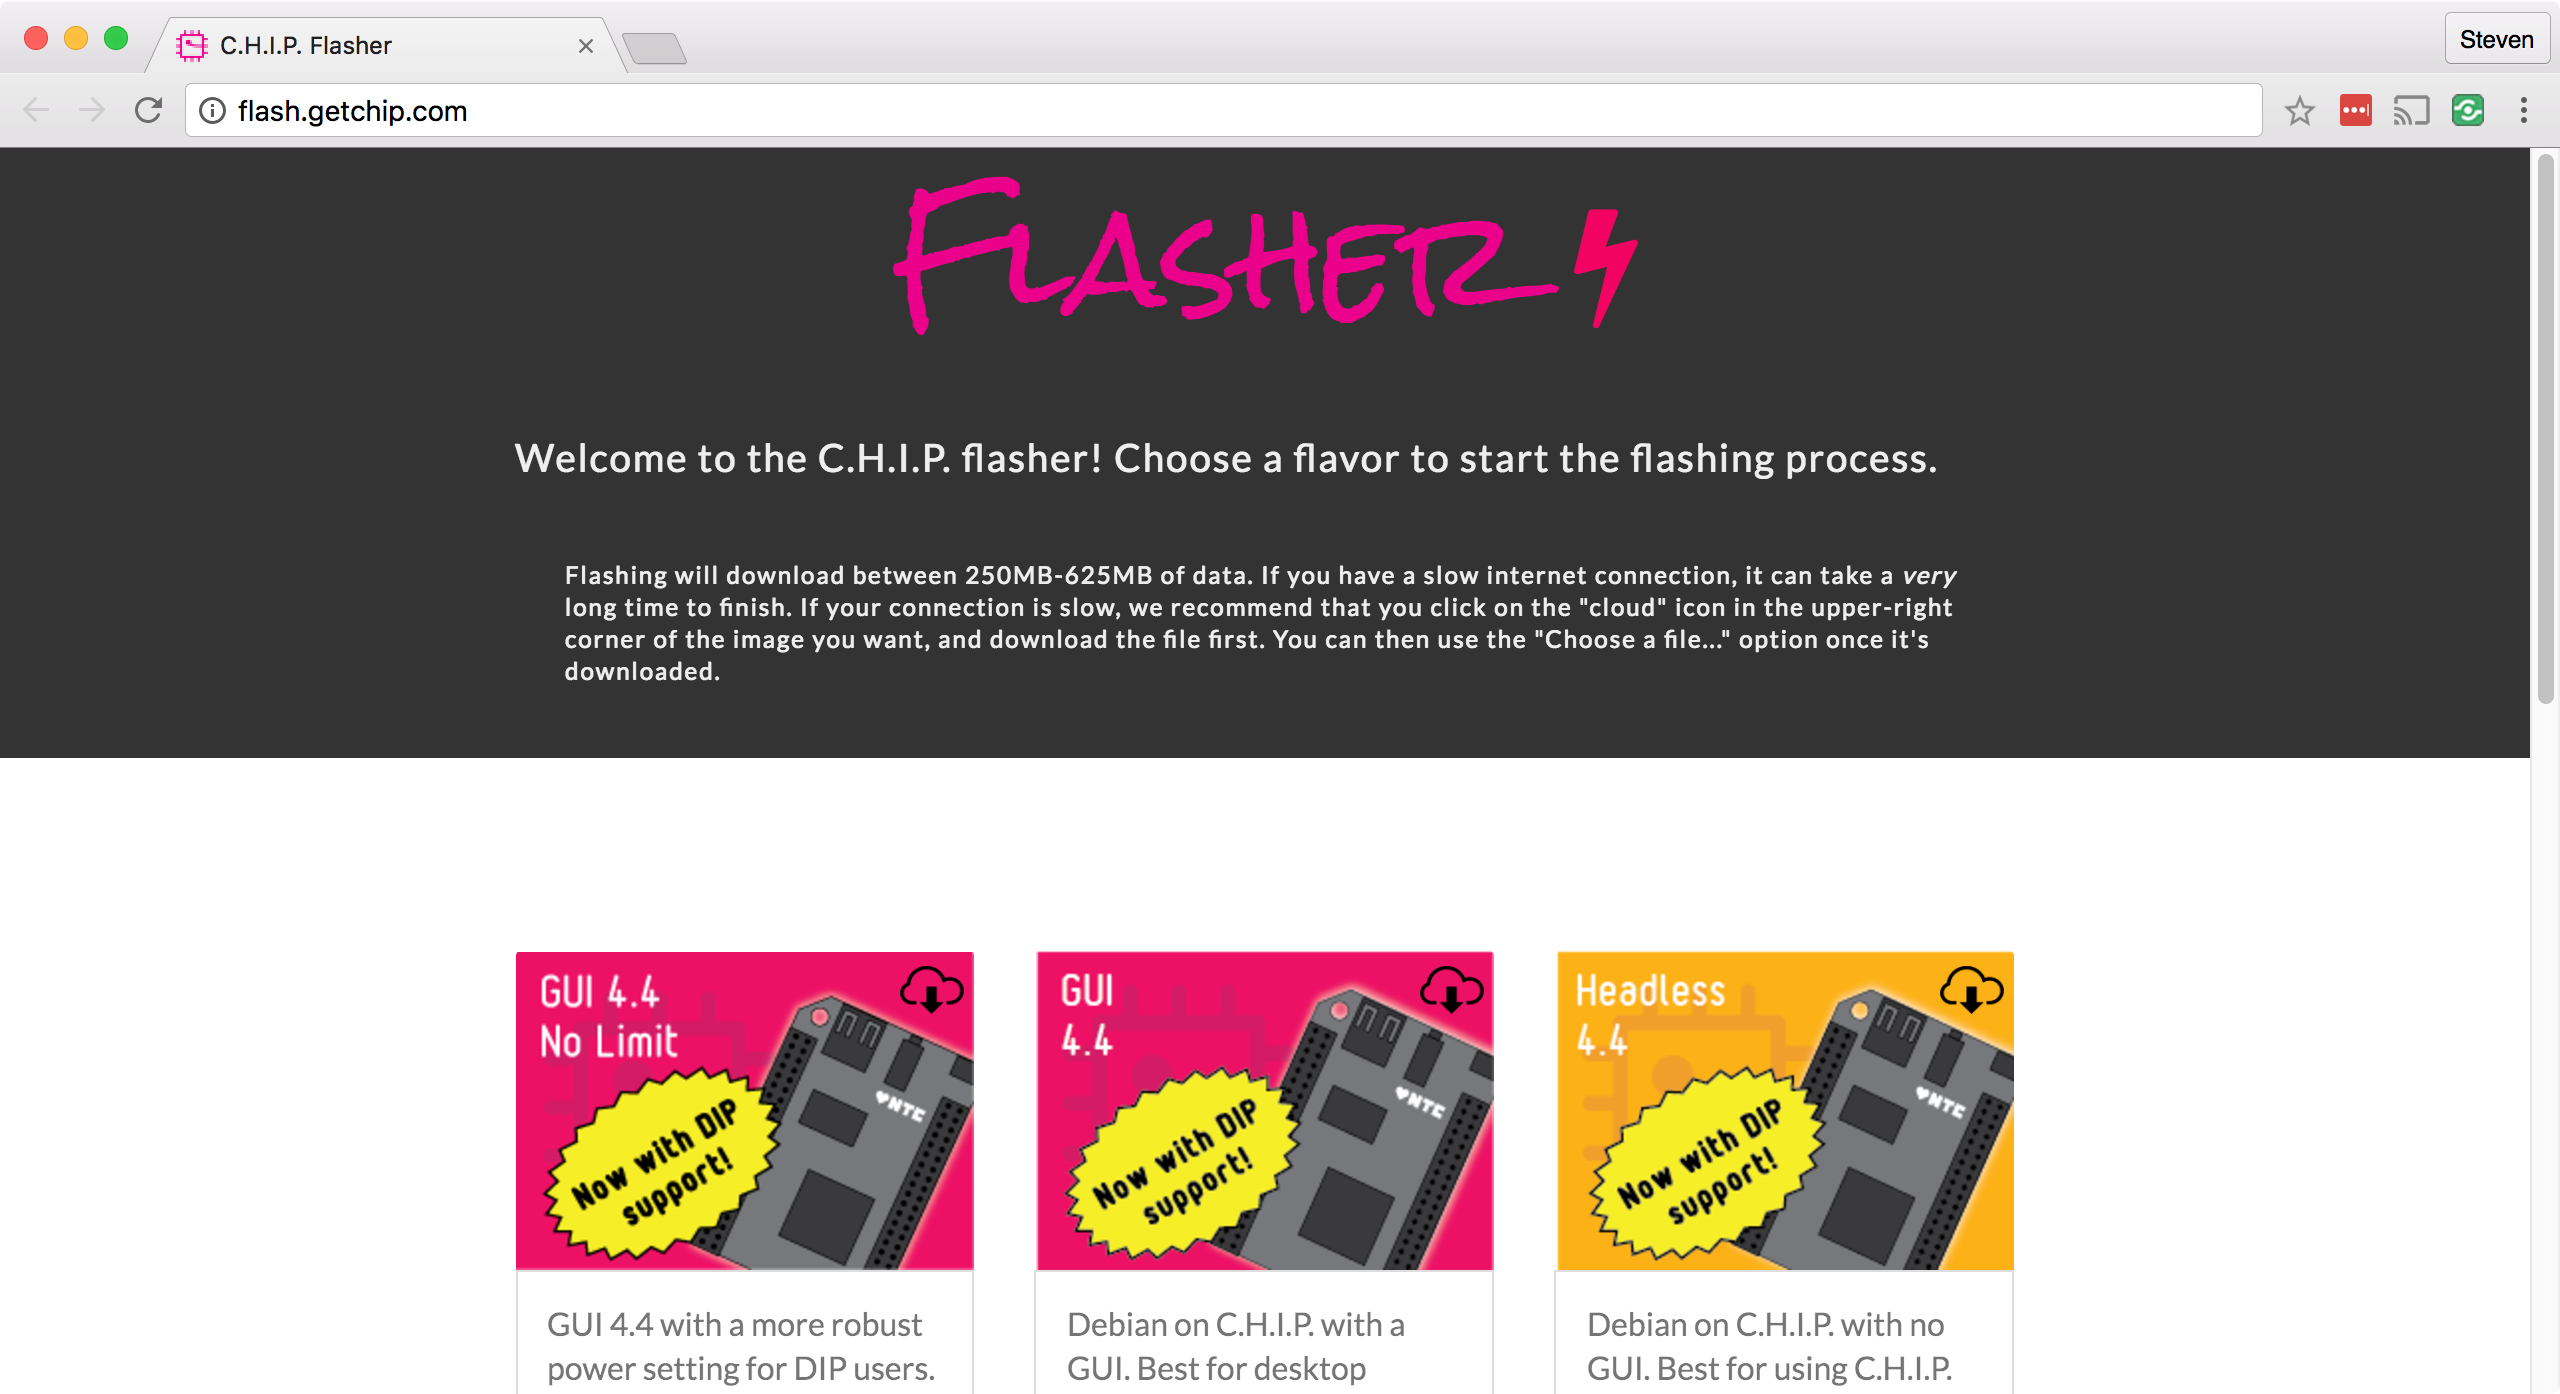 C.H.I.P. Flasher Page